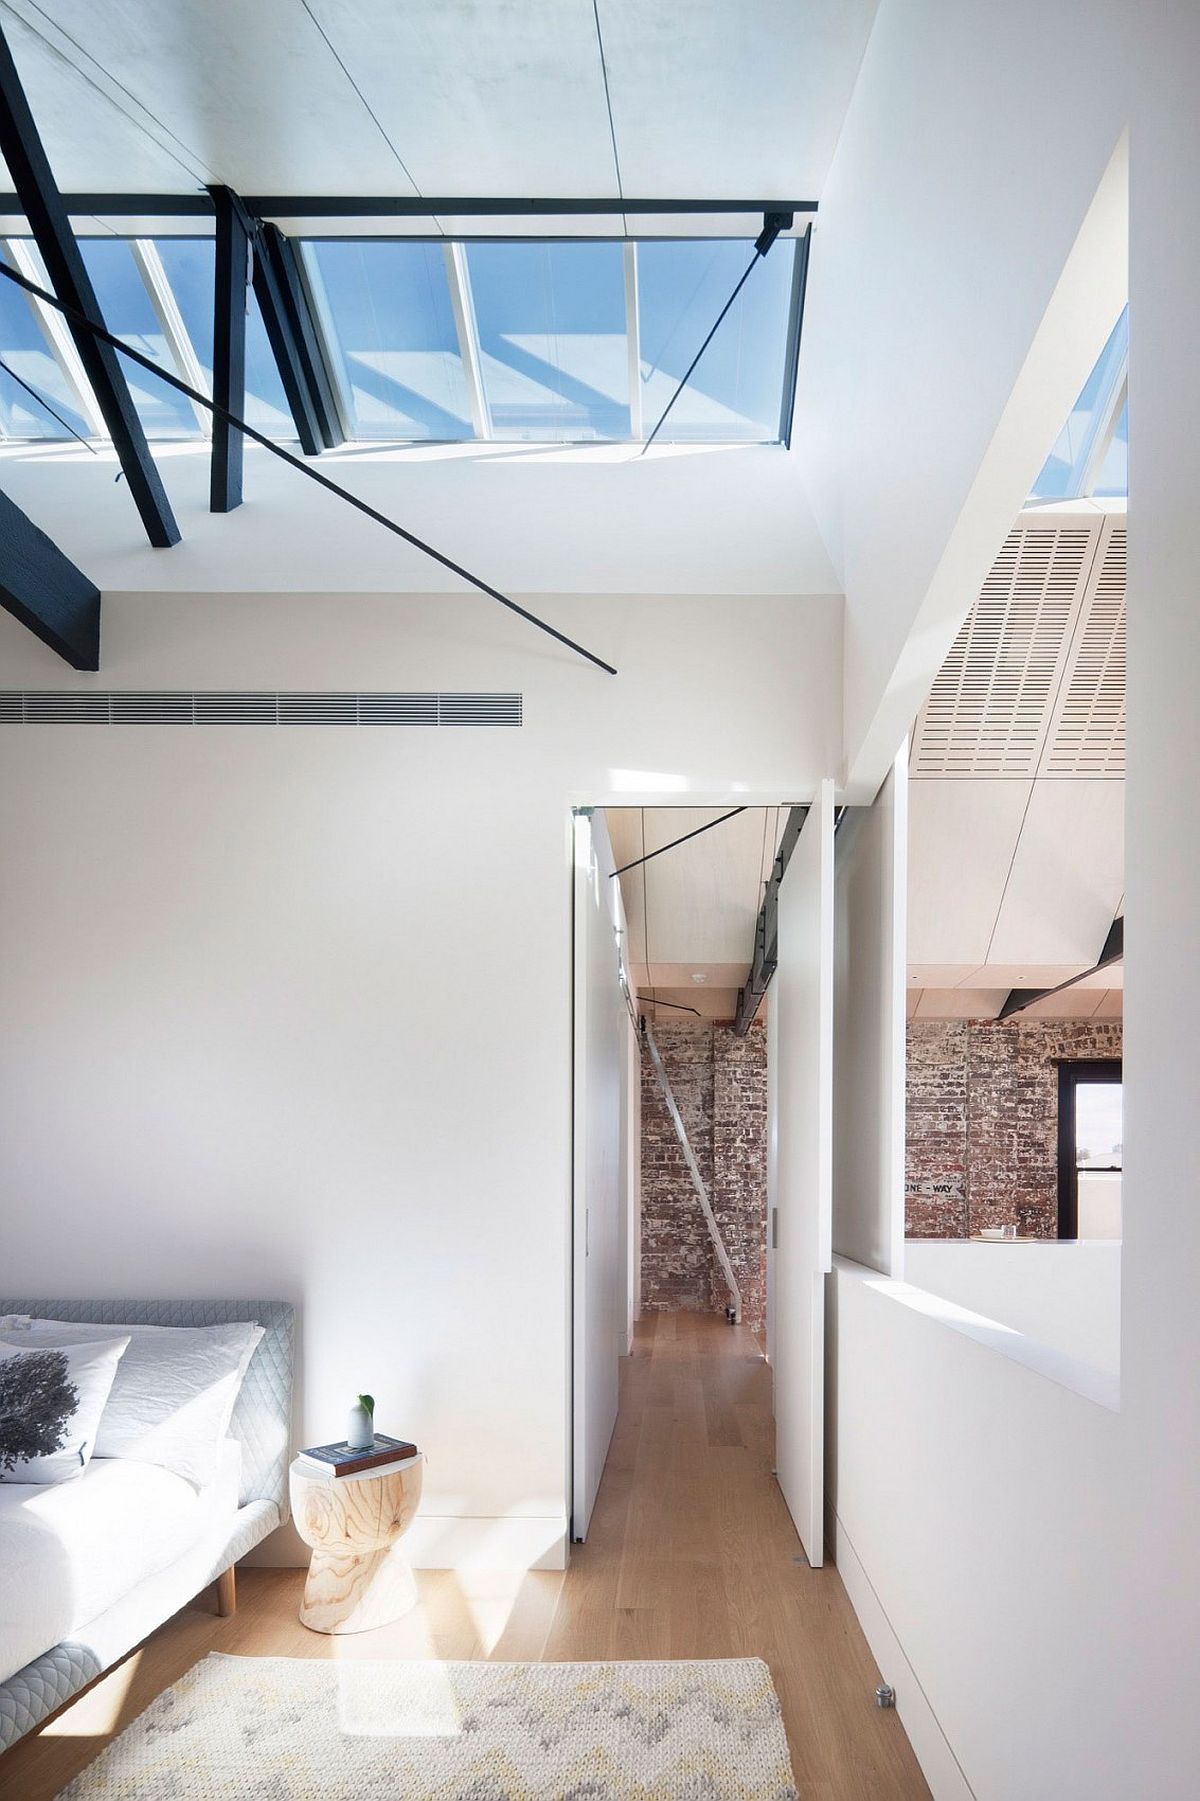 Exposed brick walls stand in contrast to the white, modern surfaces inside the house